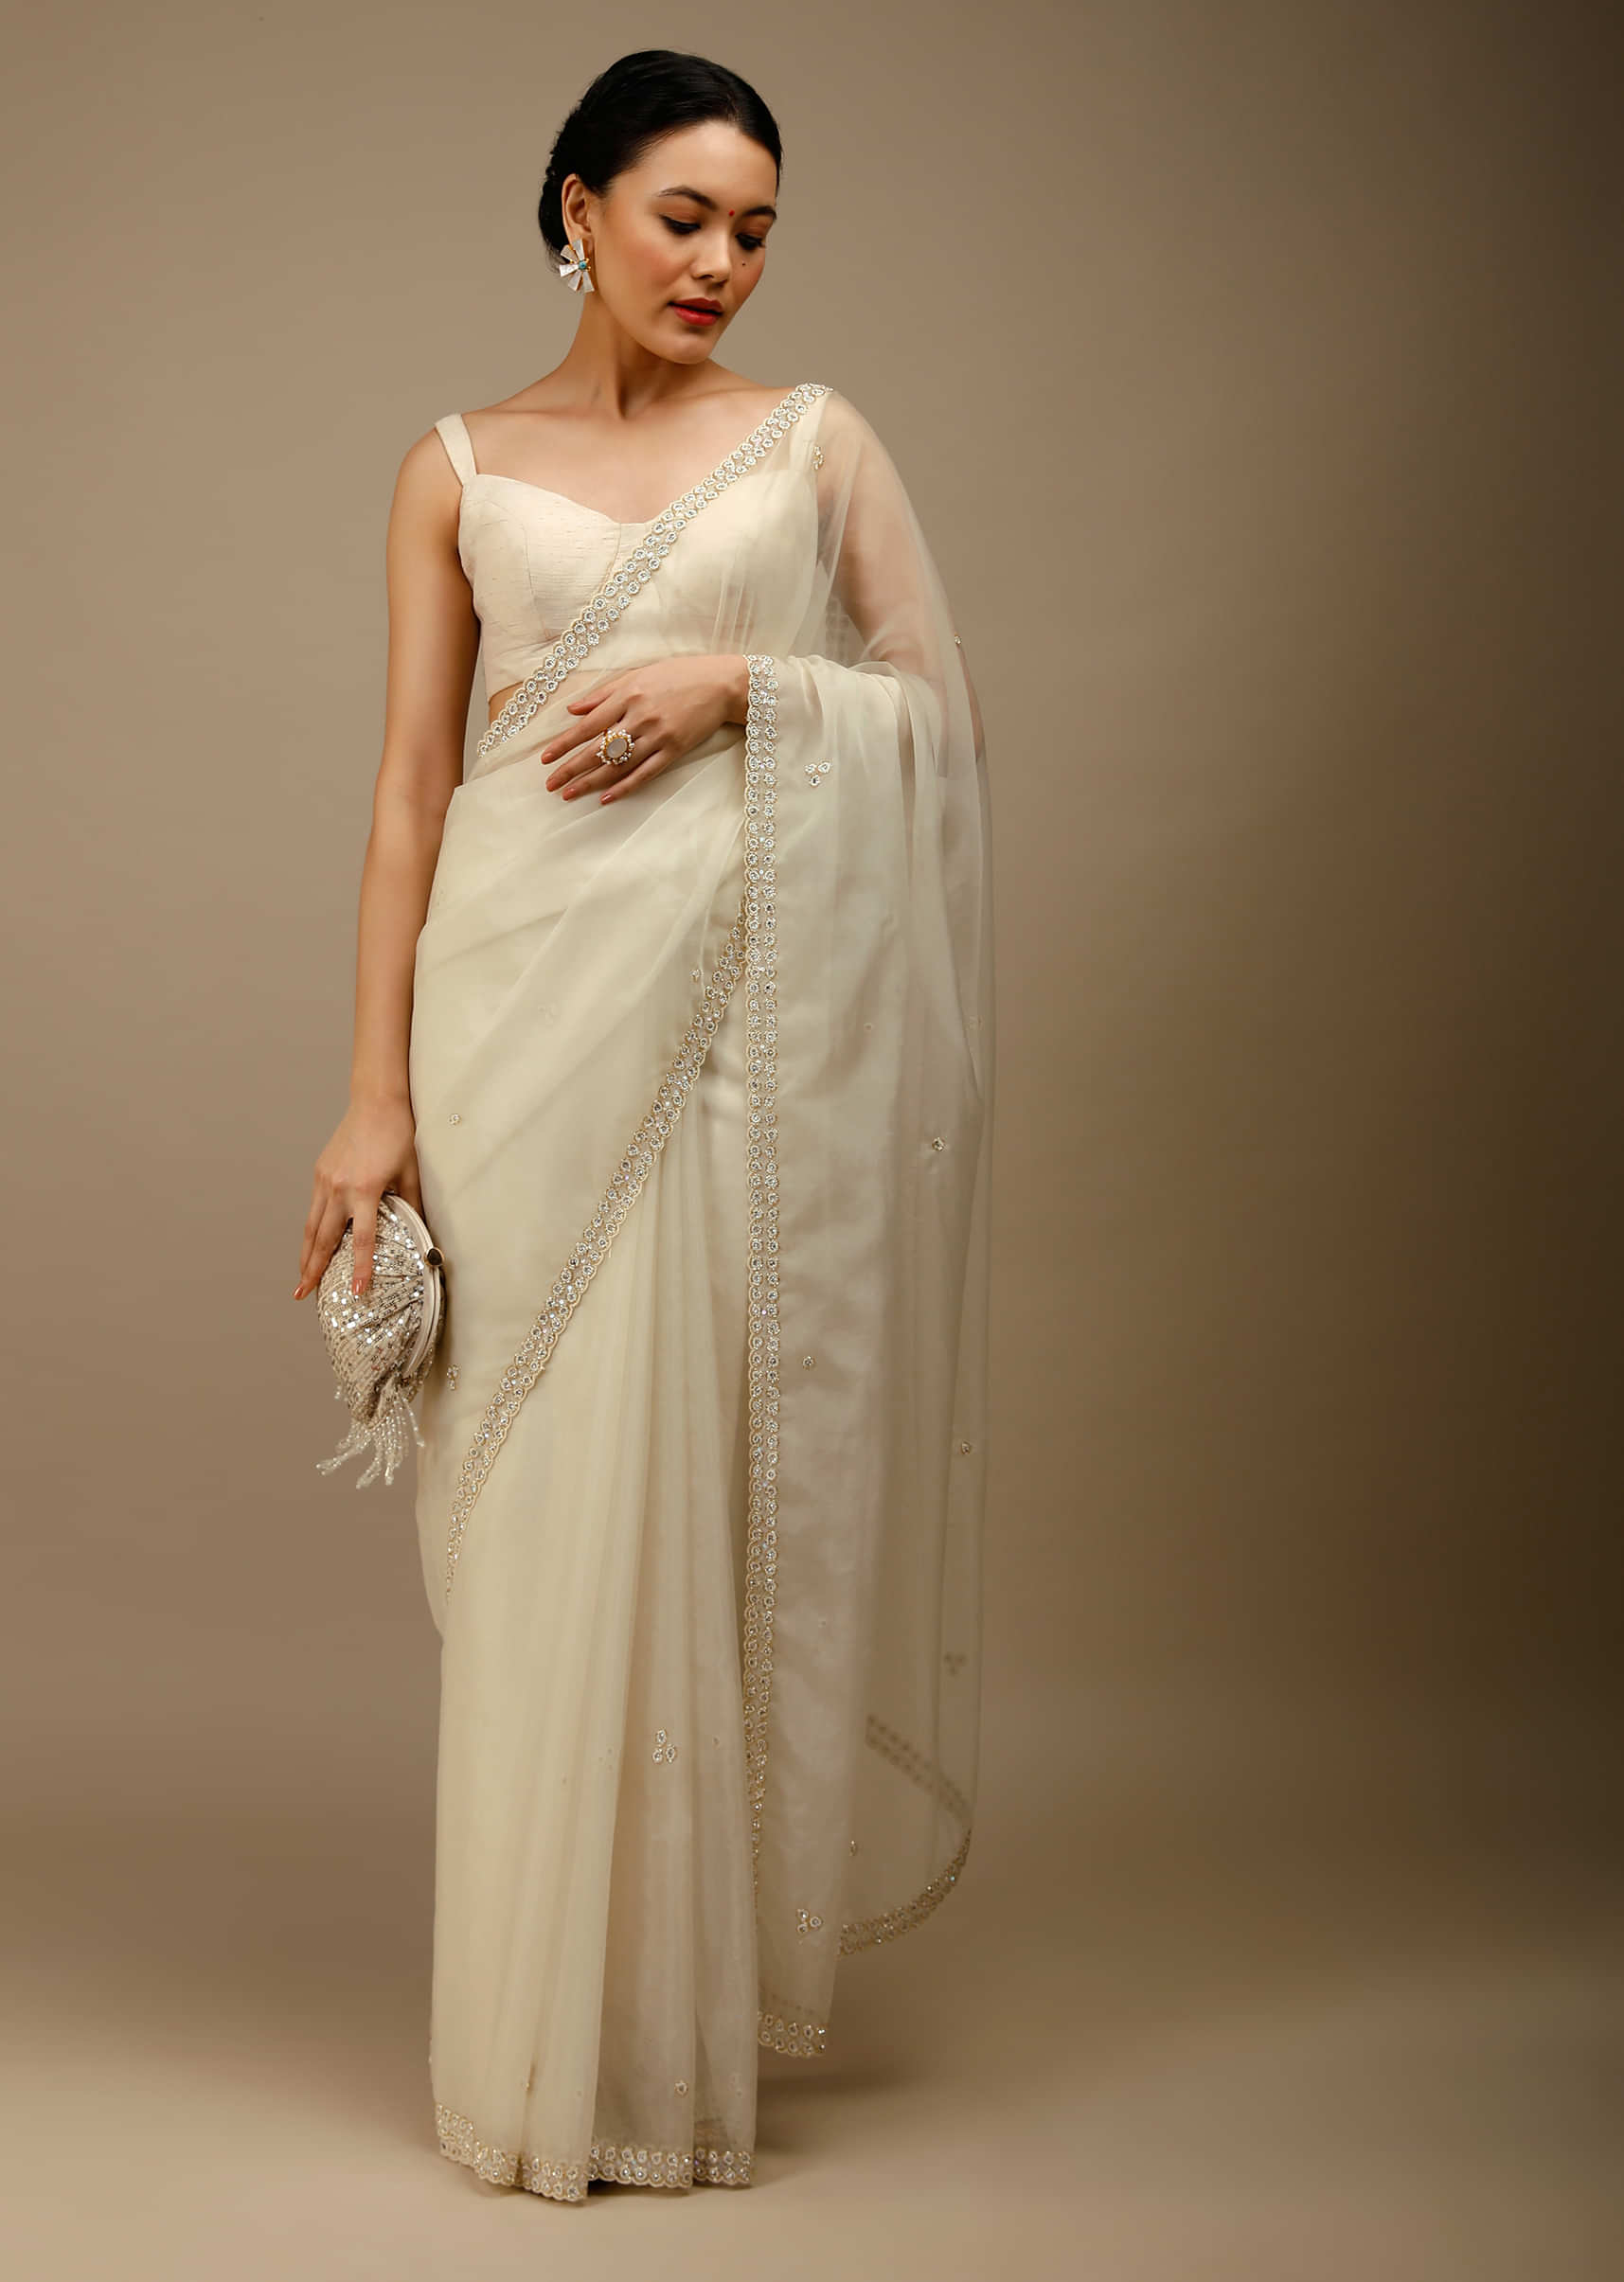 Marshmallow White Saree In Organza With Moti Beads And Stone Embroidered Round Motifs On The Border And Butti Design  